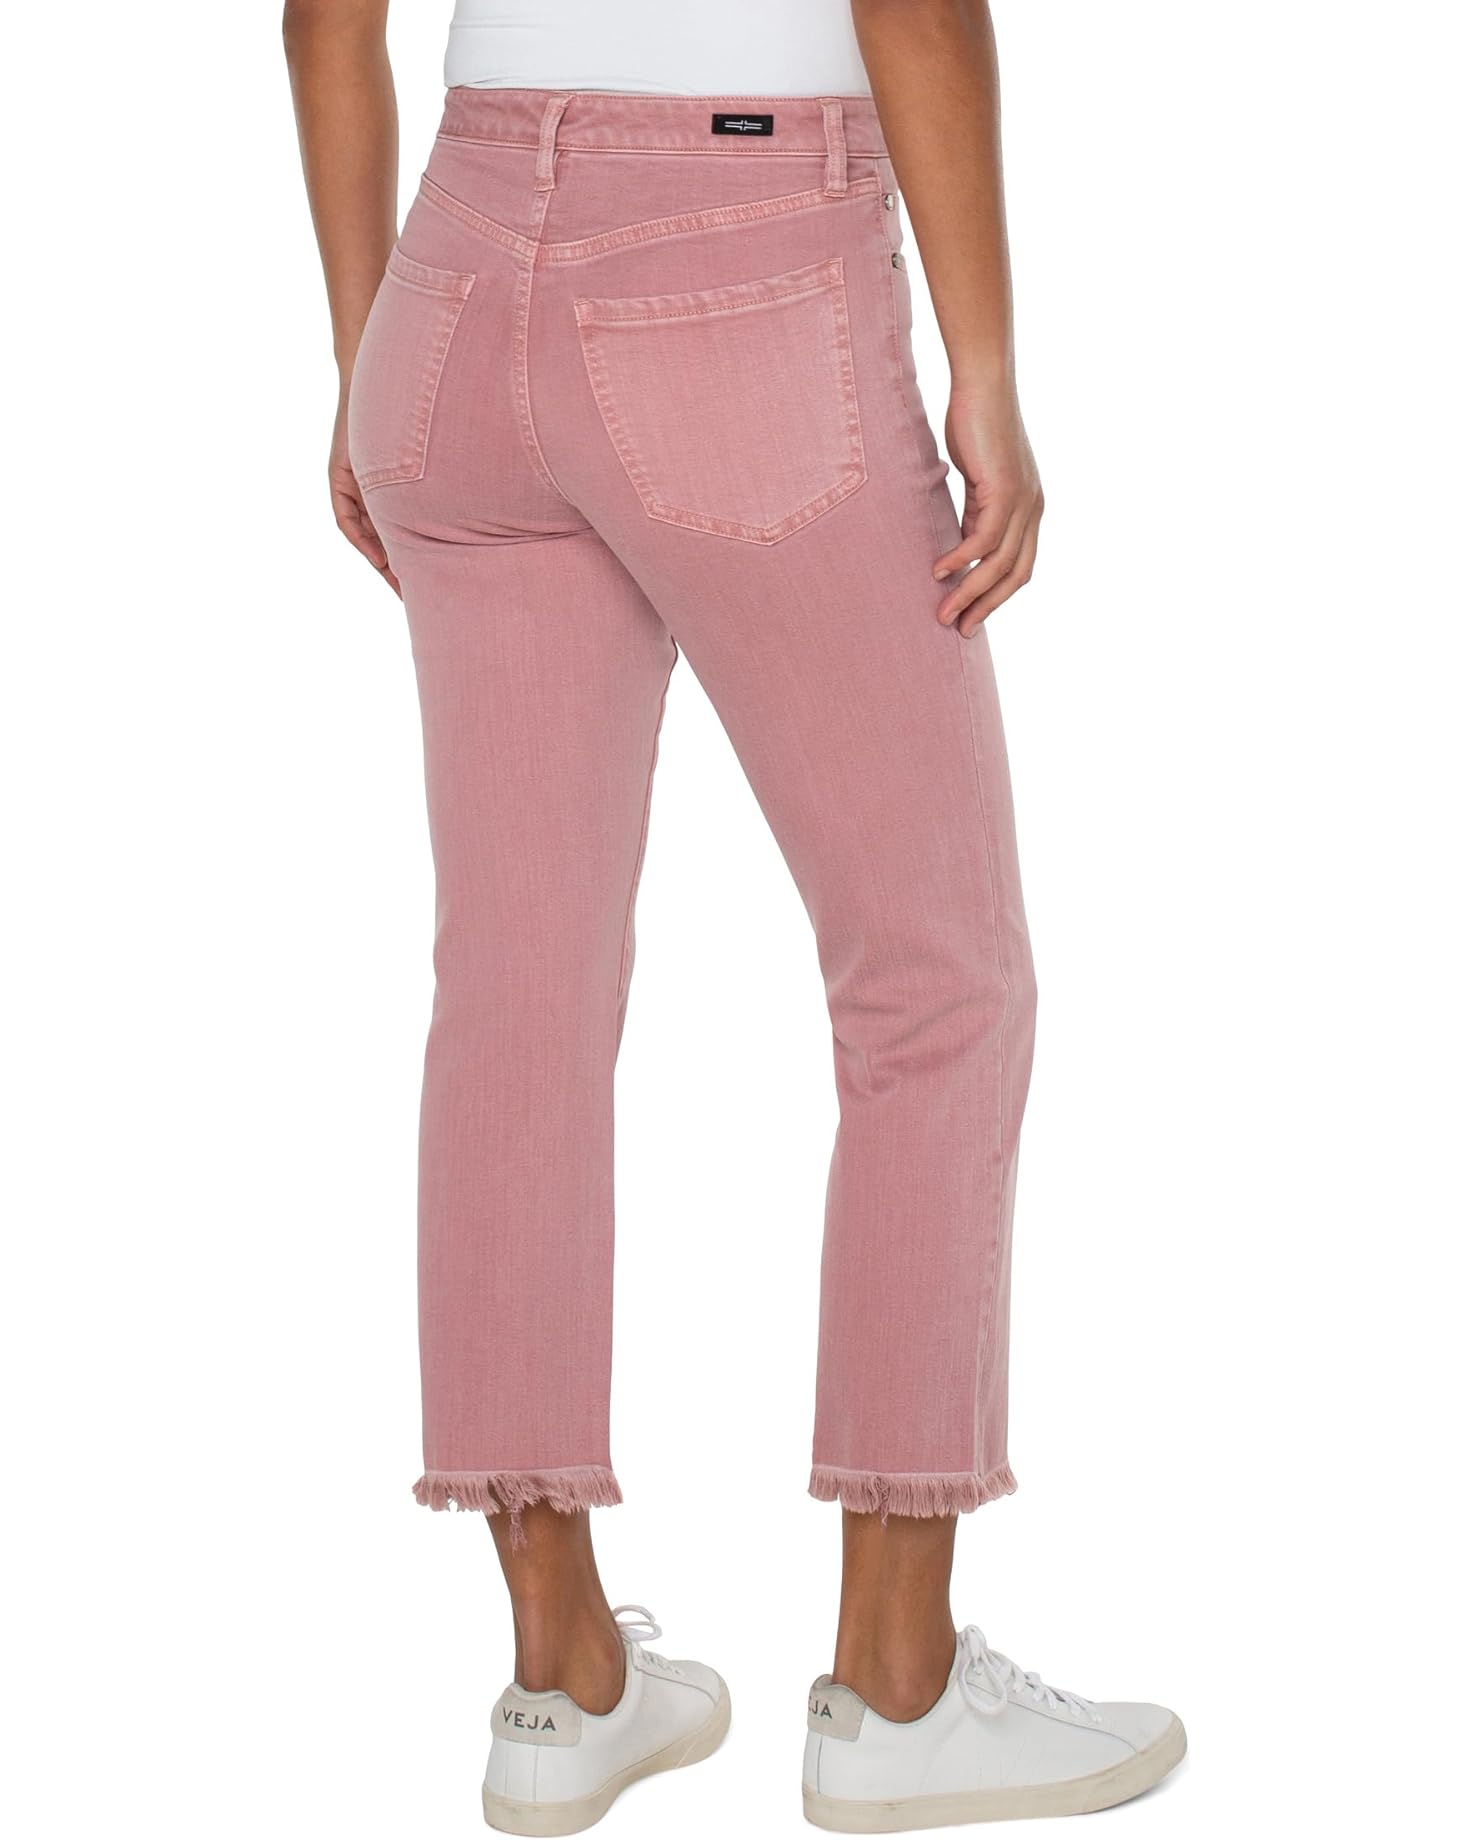 Kennedy Crop Straight with Fray Hem - Antique Rose